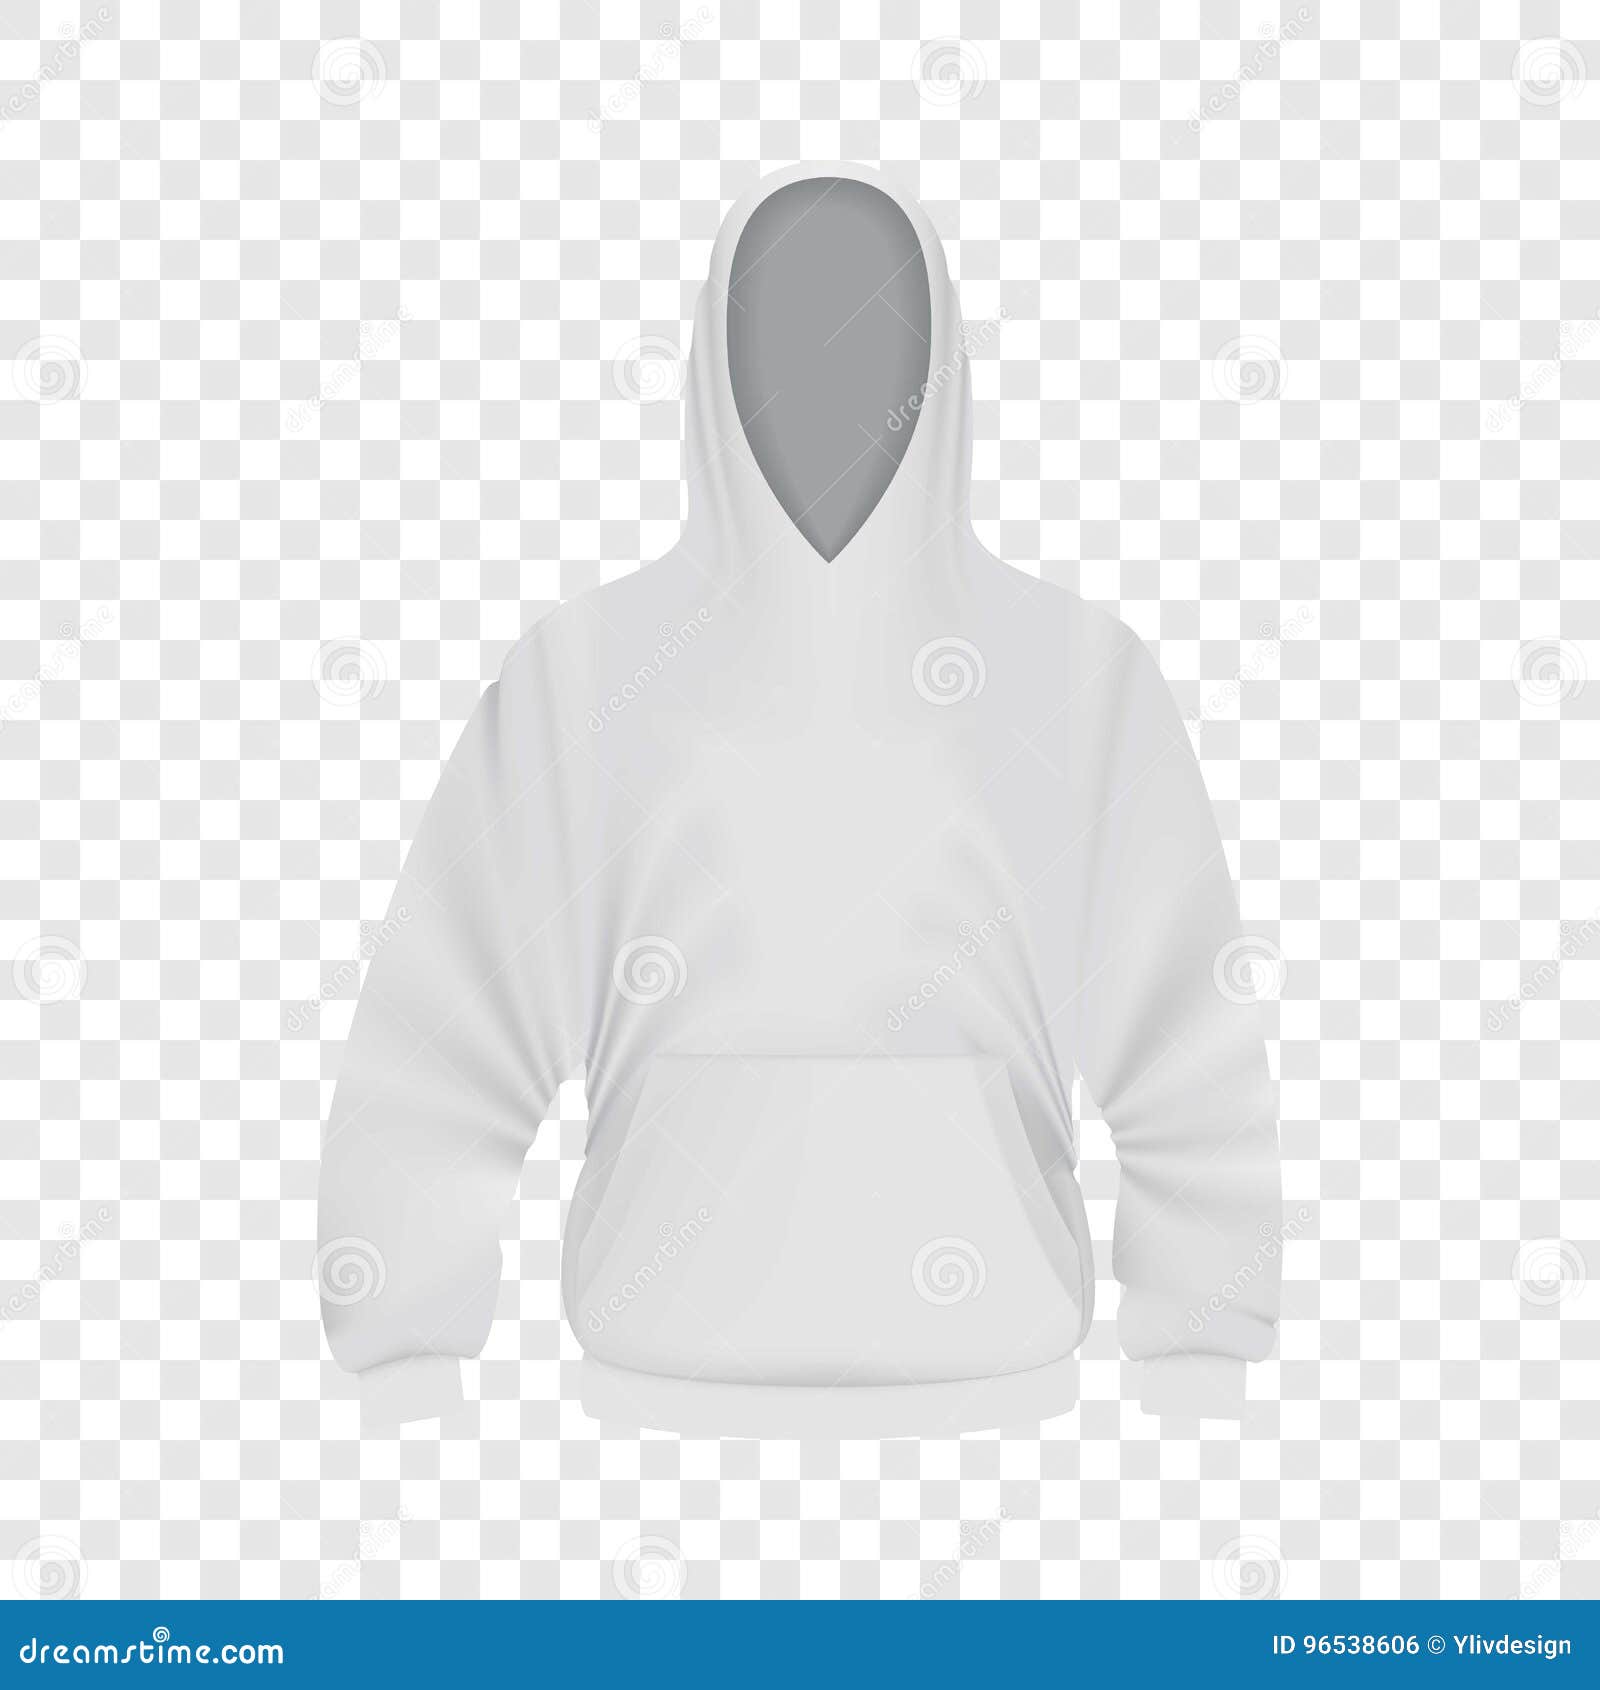 Download White Hoodie Mockup, Realistic Style Stock Vector ...